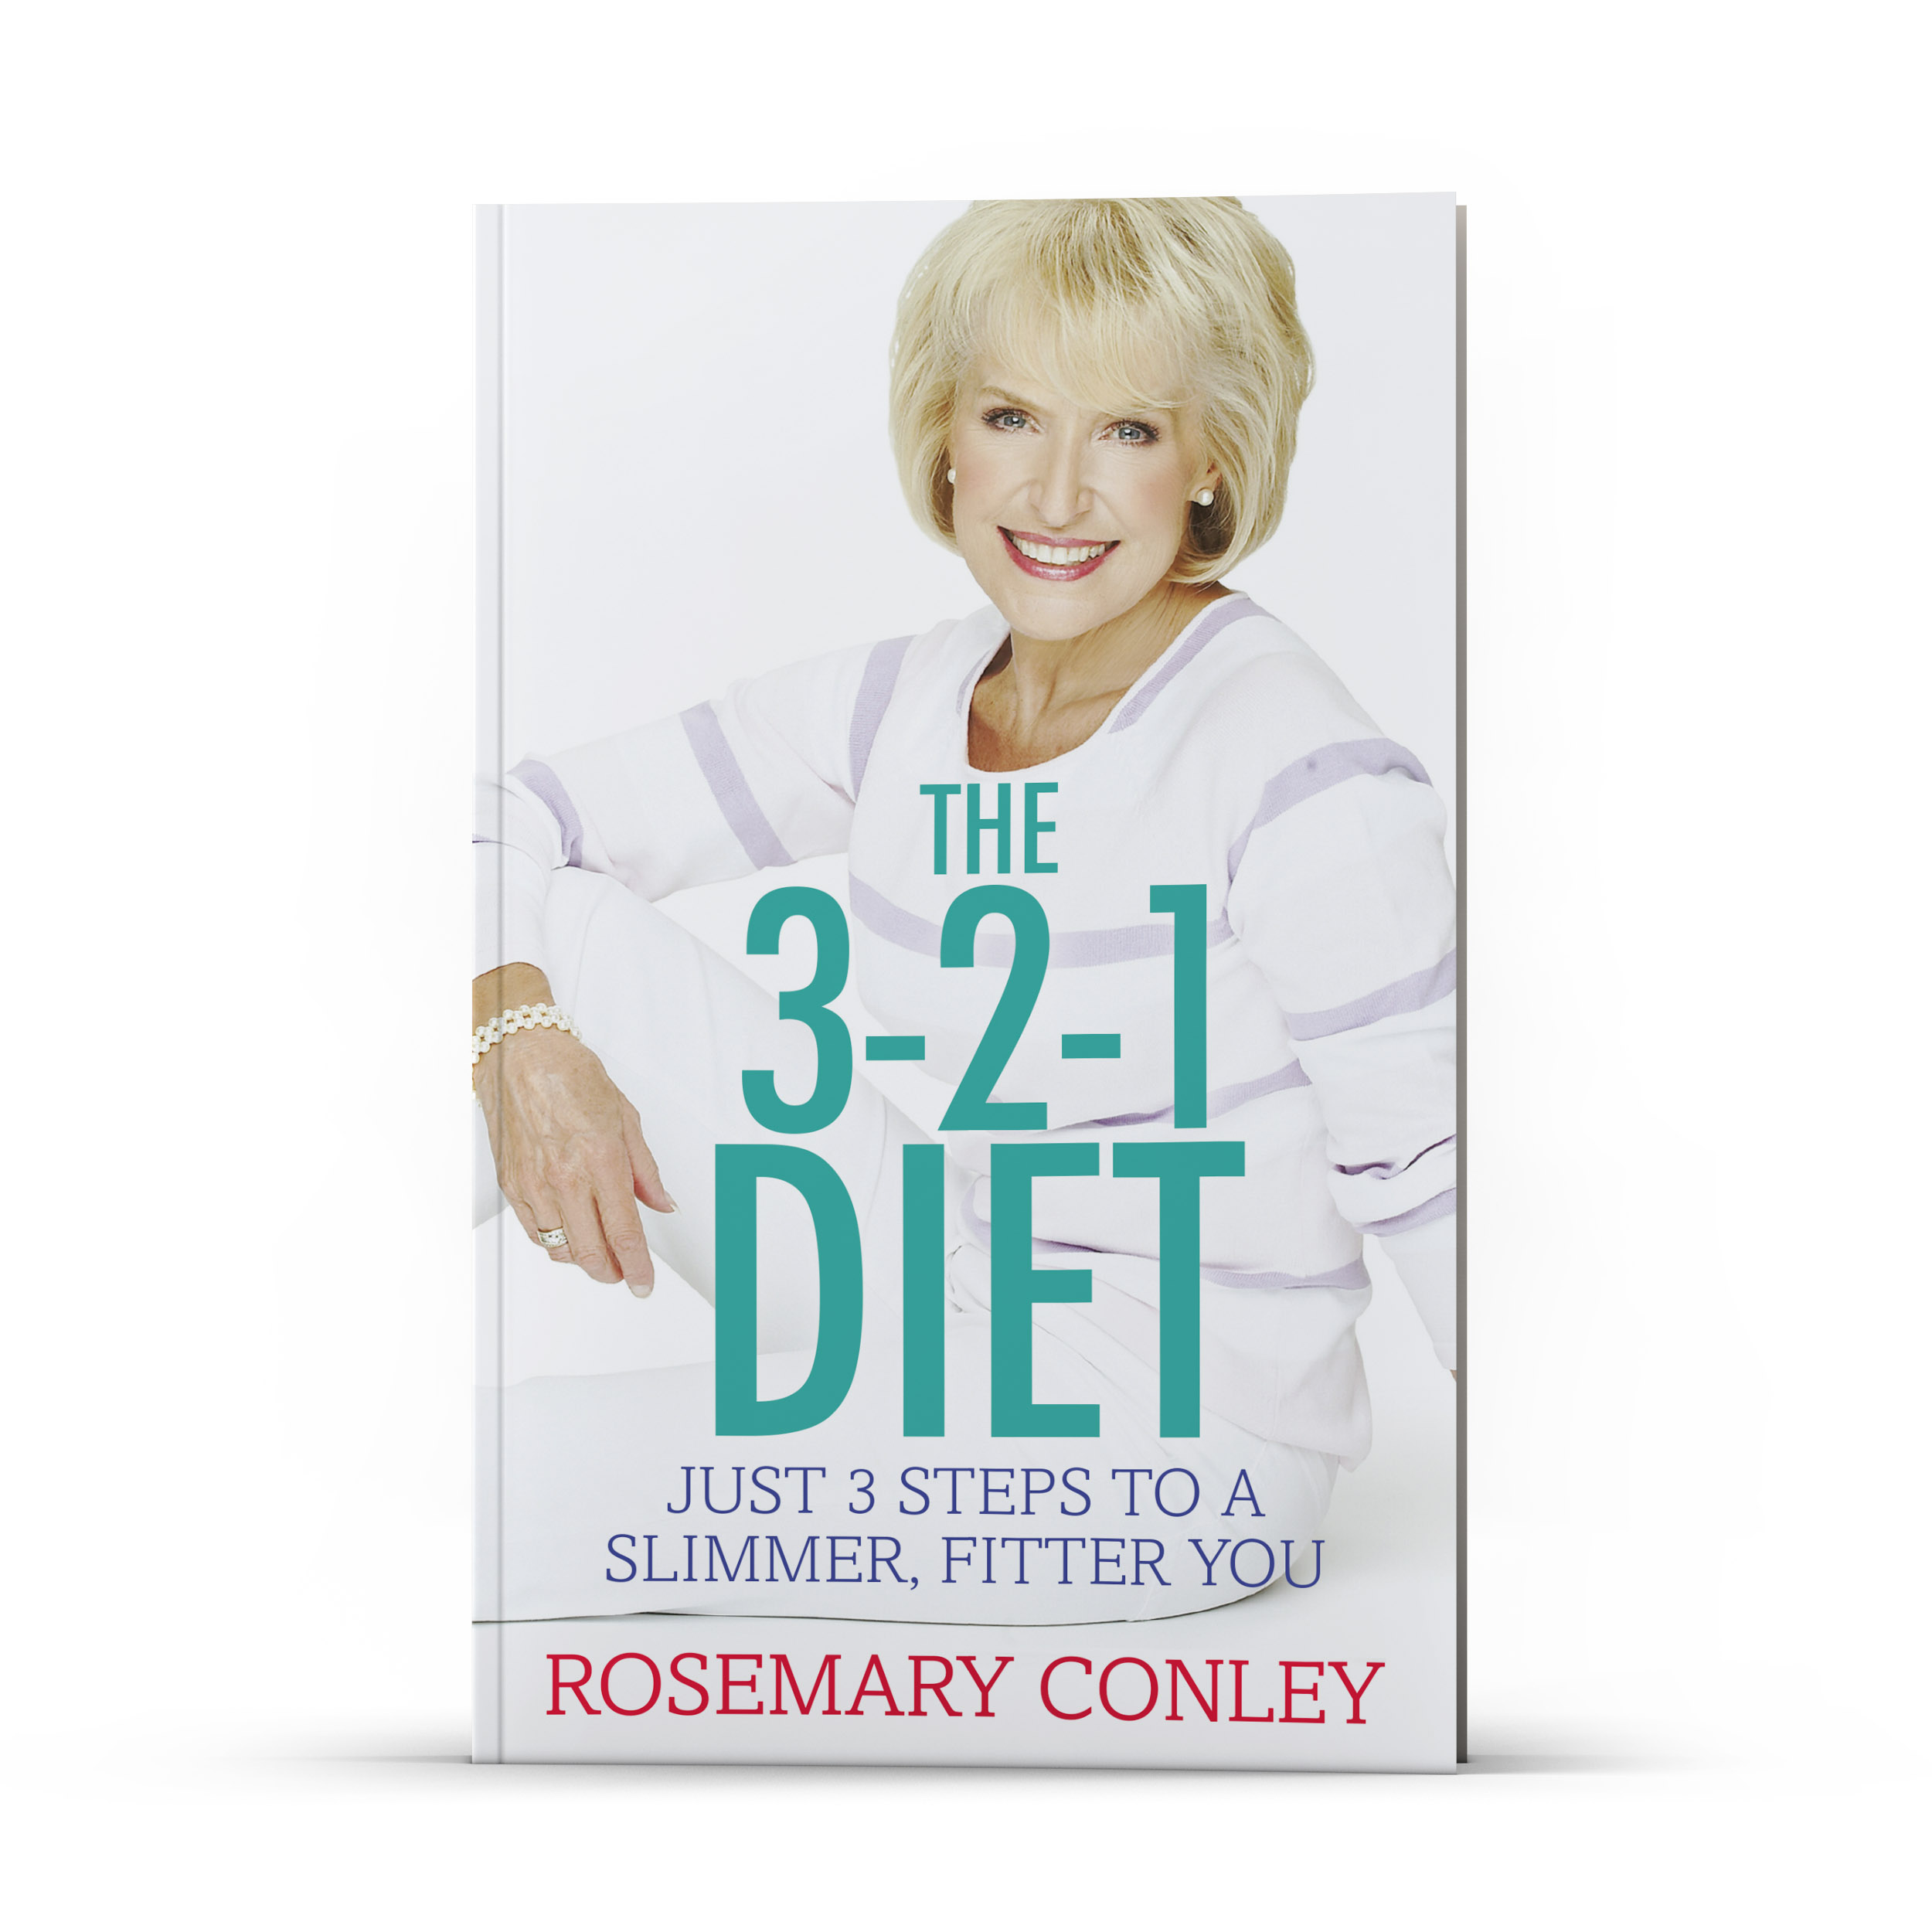 Front cover of The 3-2-1 Diet paperback book by Rosemary Conley